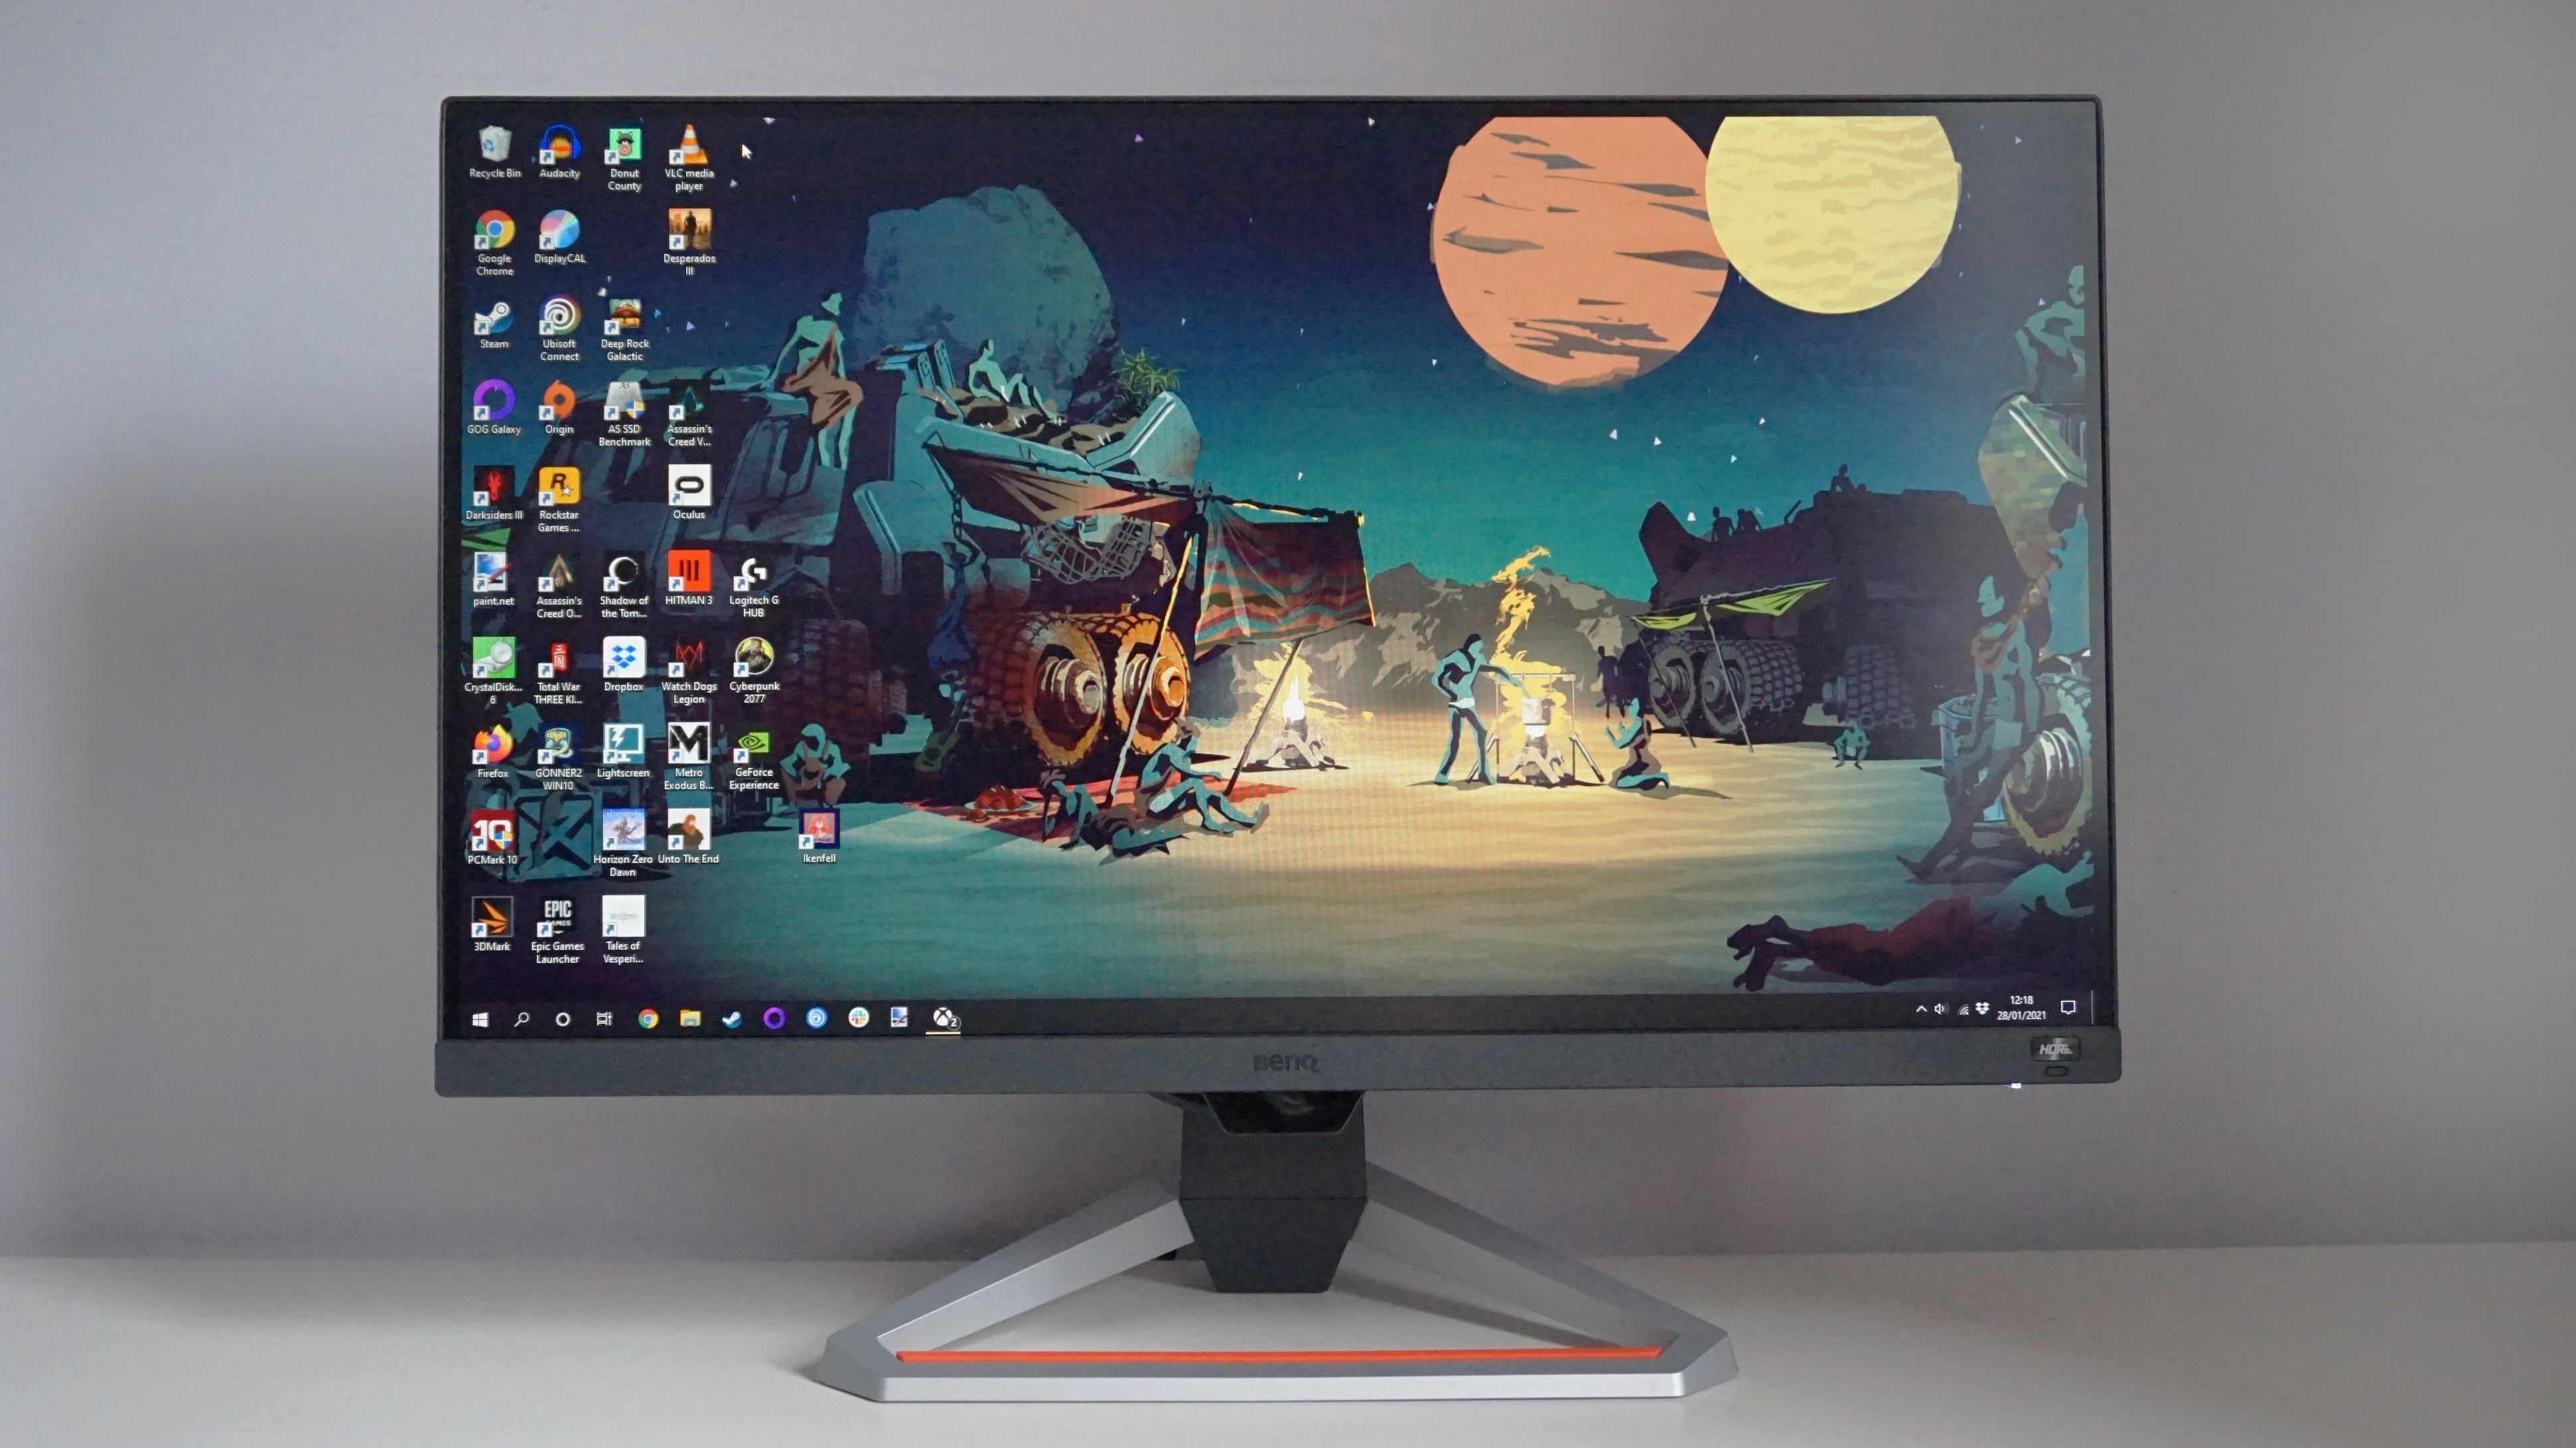 A photo of the BenQ Mobiuz EX2710 gaming monitor.